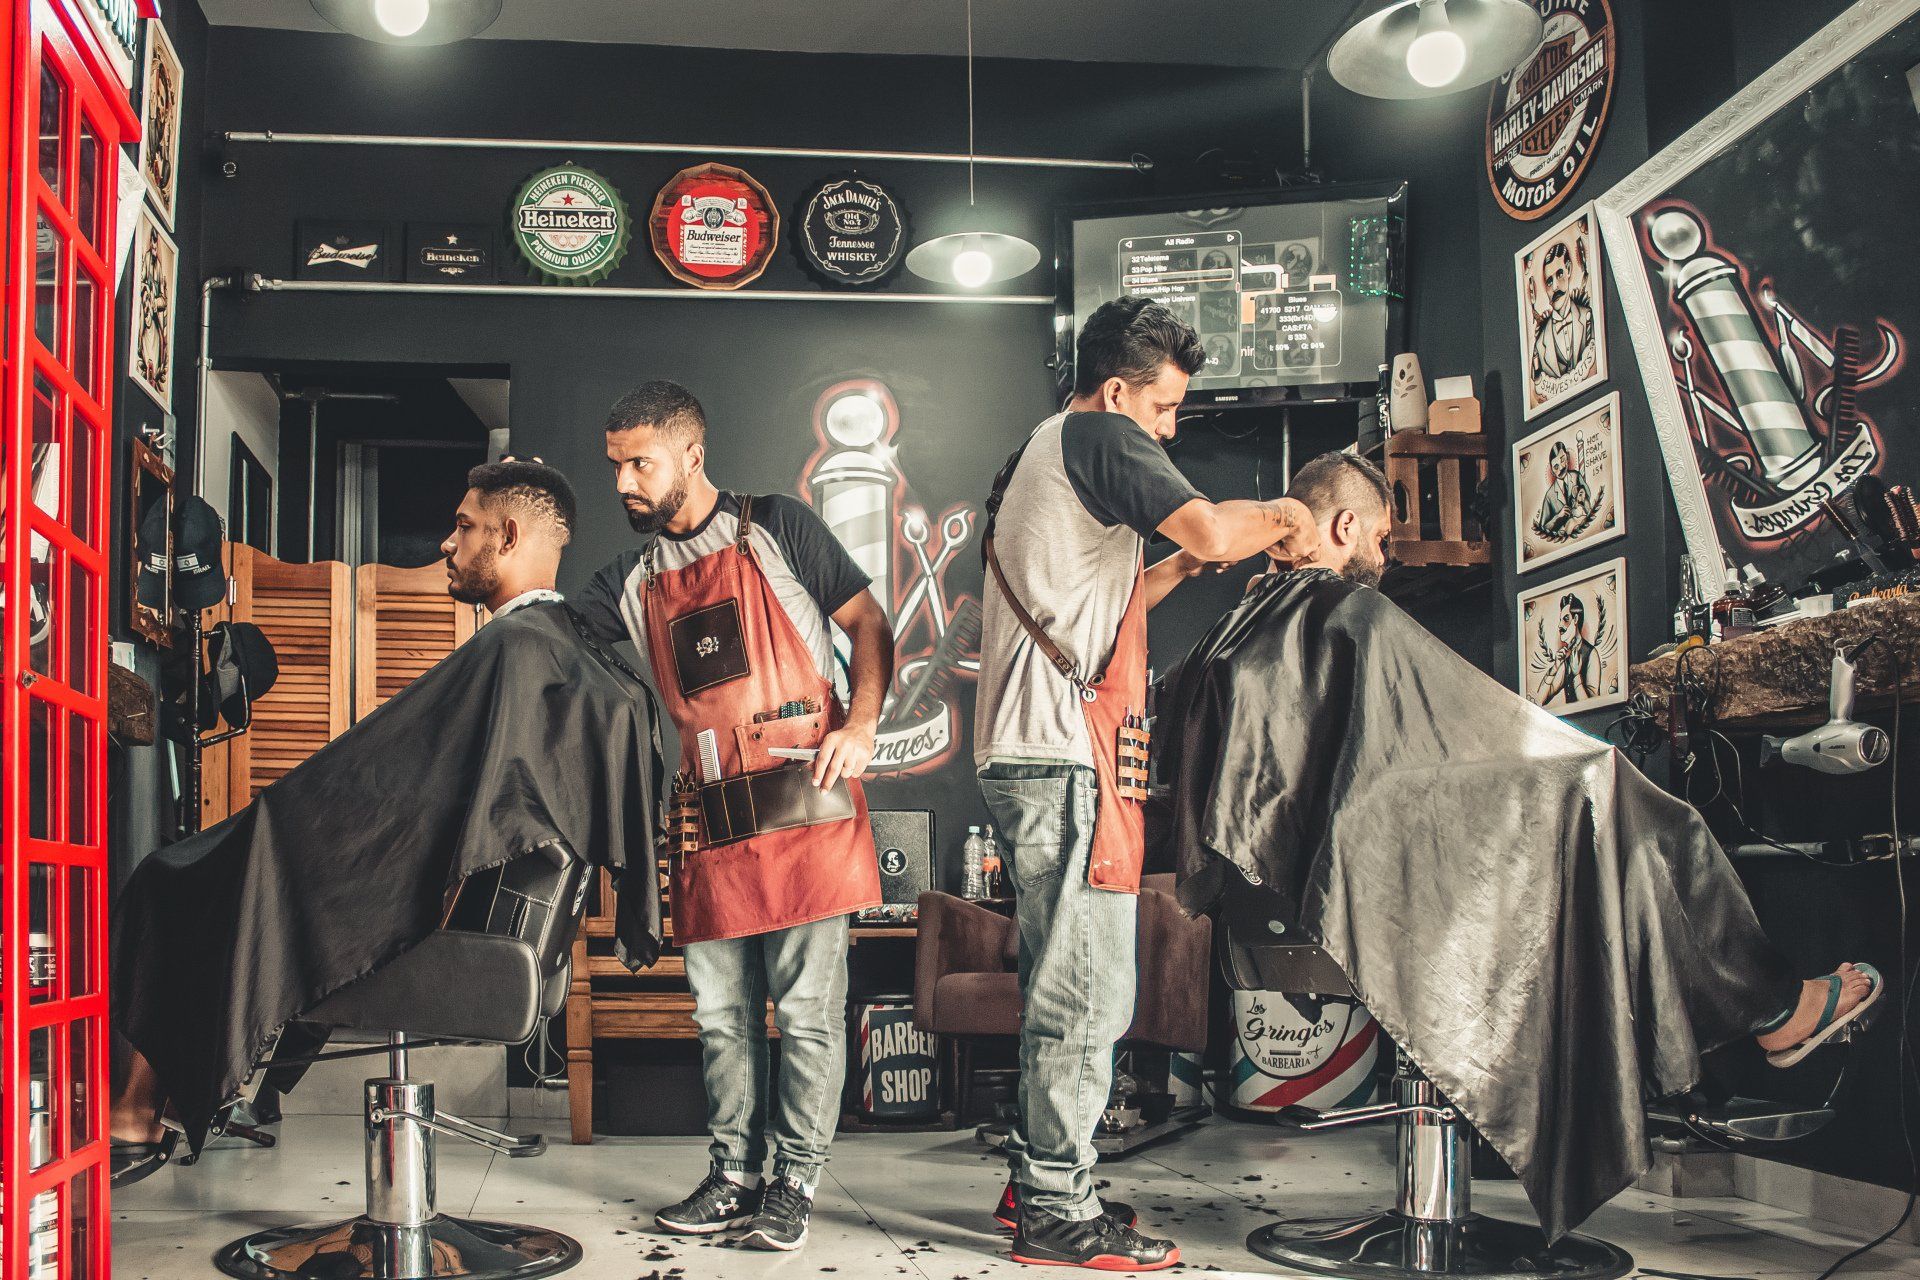 A group of men are getting their hair cut at a barber shop.